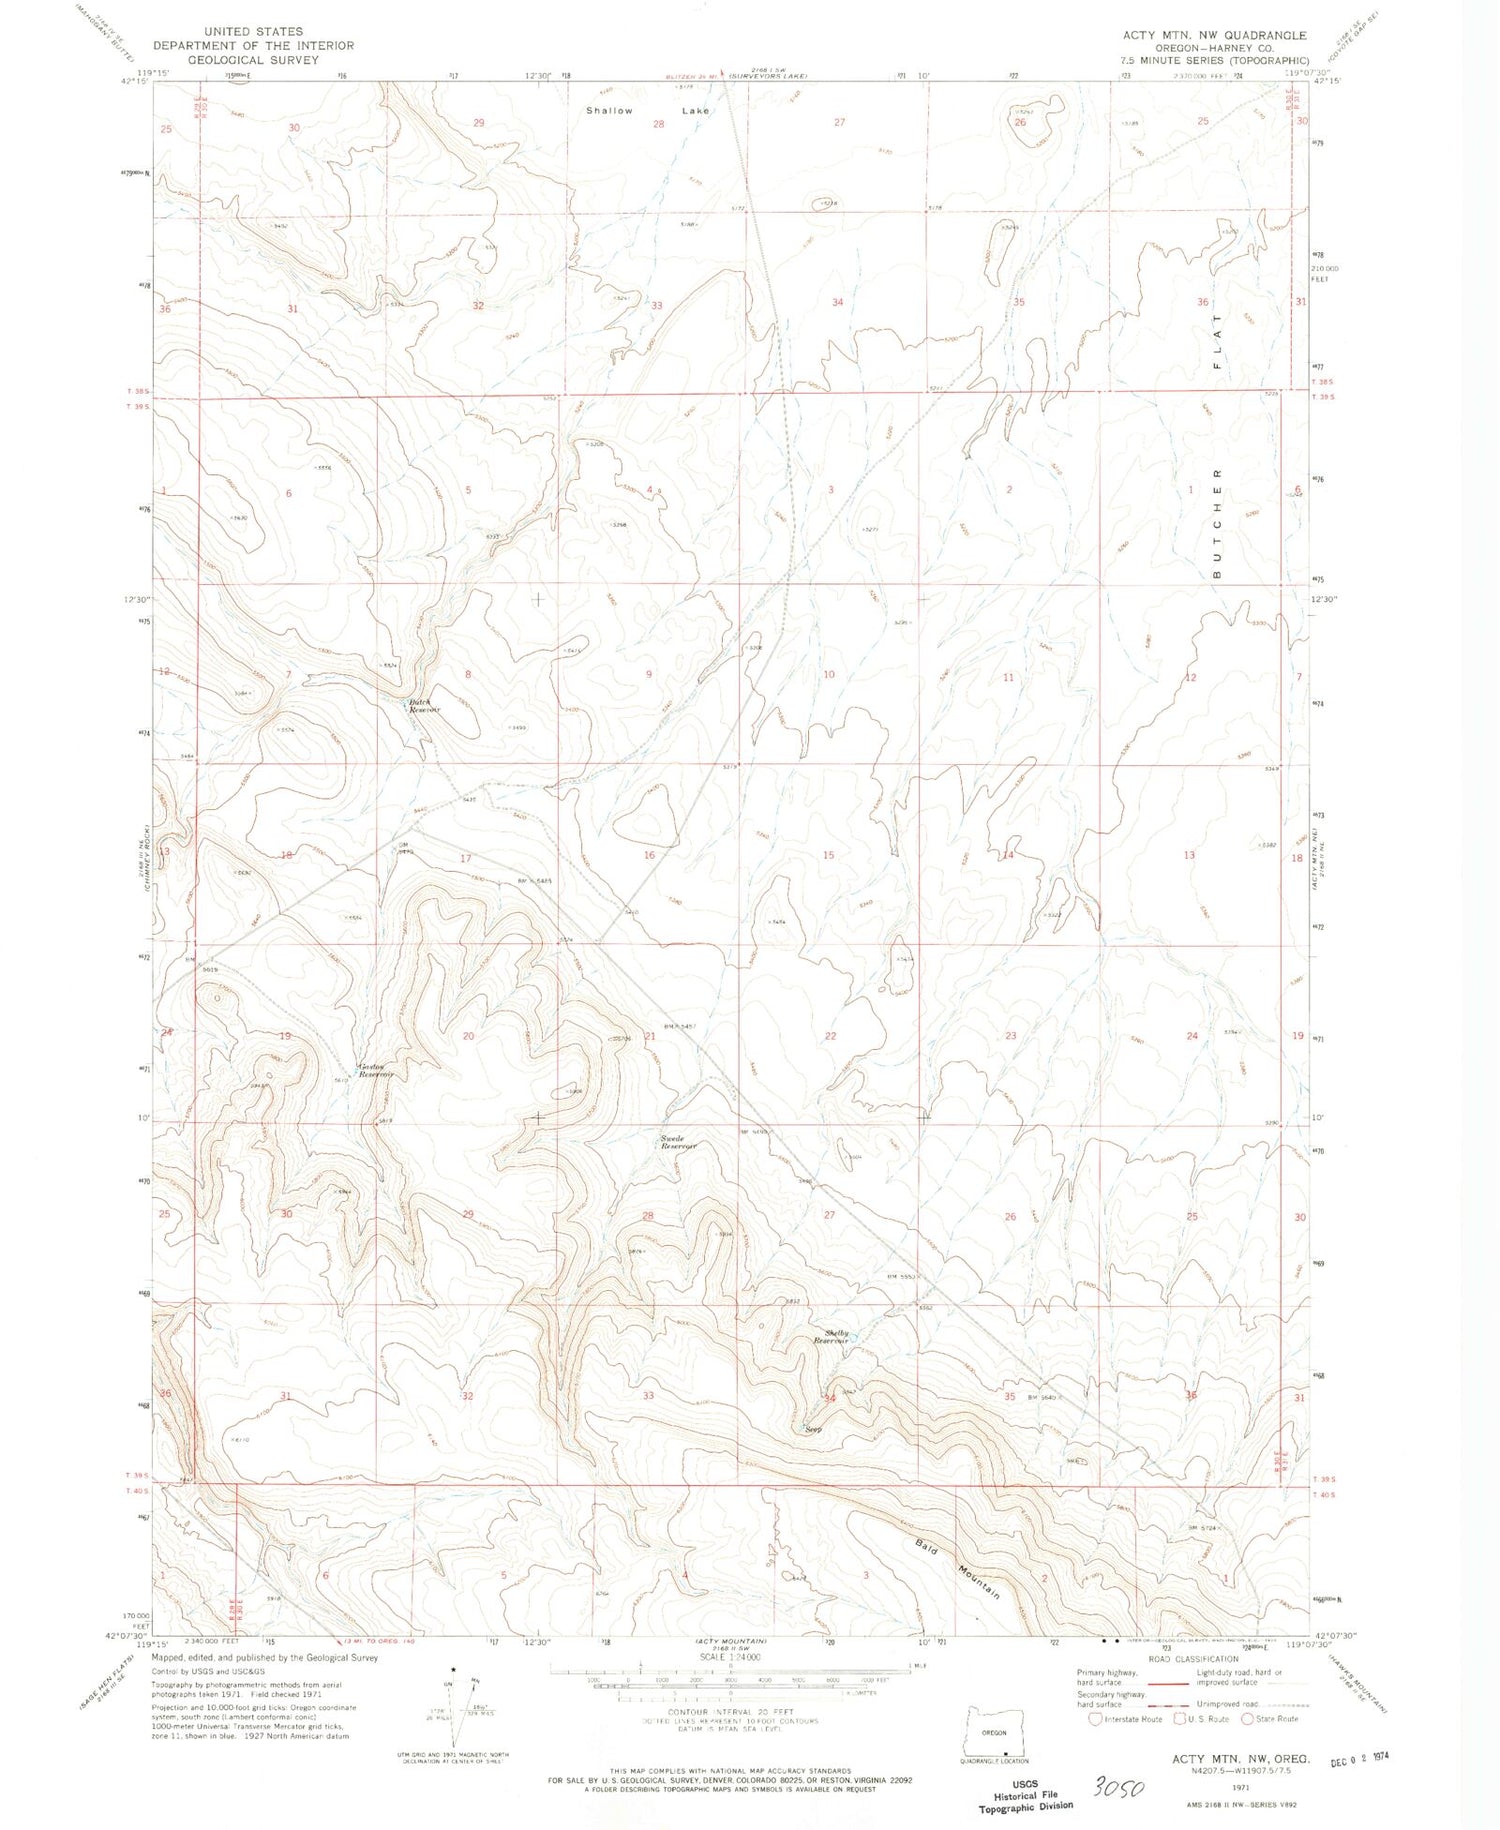 Classic USGS Acty Mountain NW Oregon 7.5'x7.5' Topo Map Image